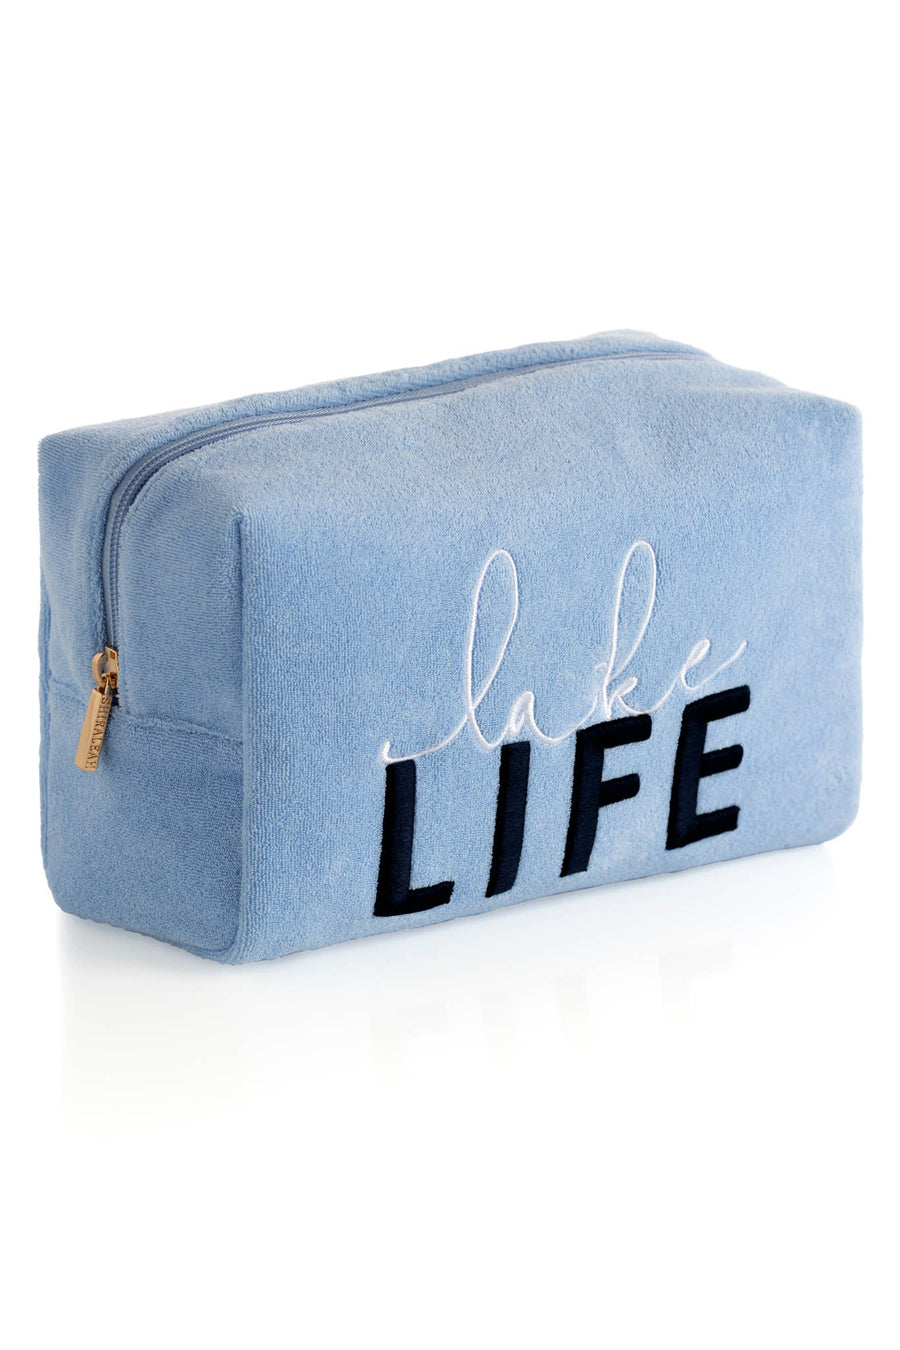 Sol Lake Life Zip Pouch, Sky - Bloom and Petal